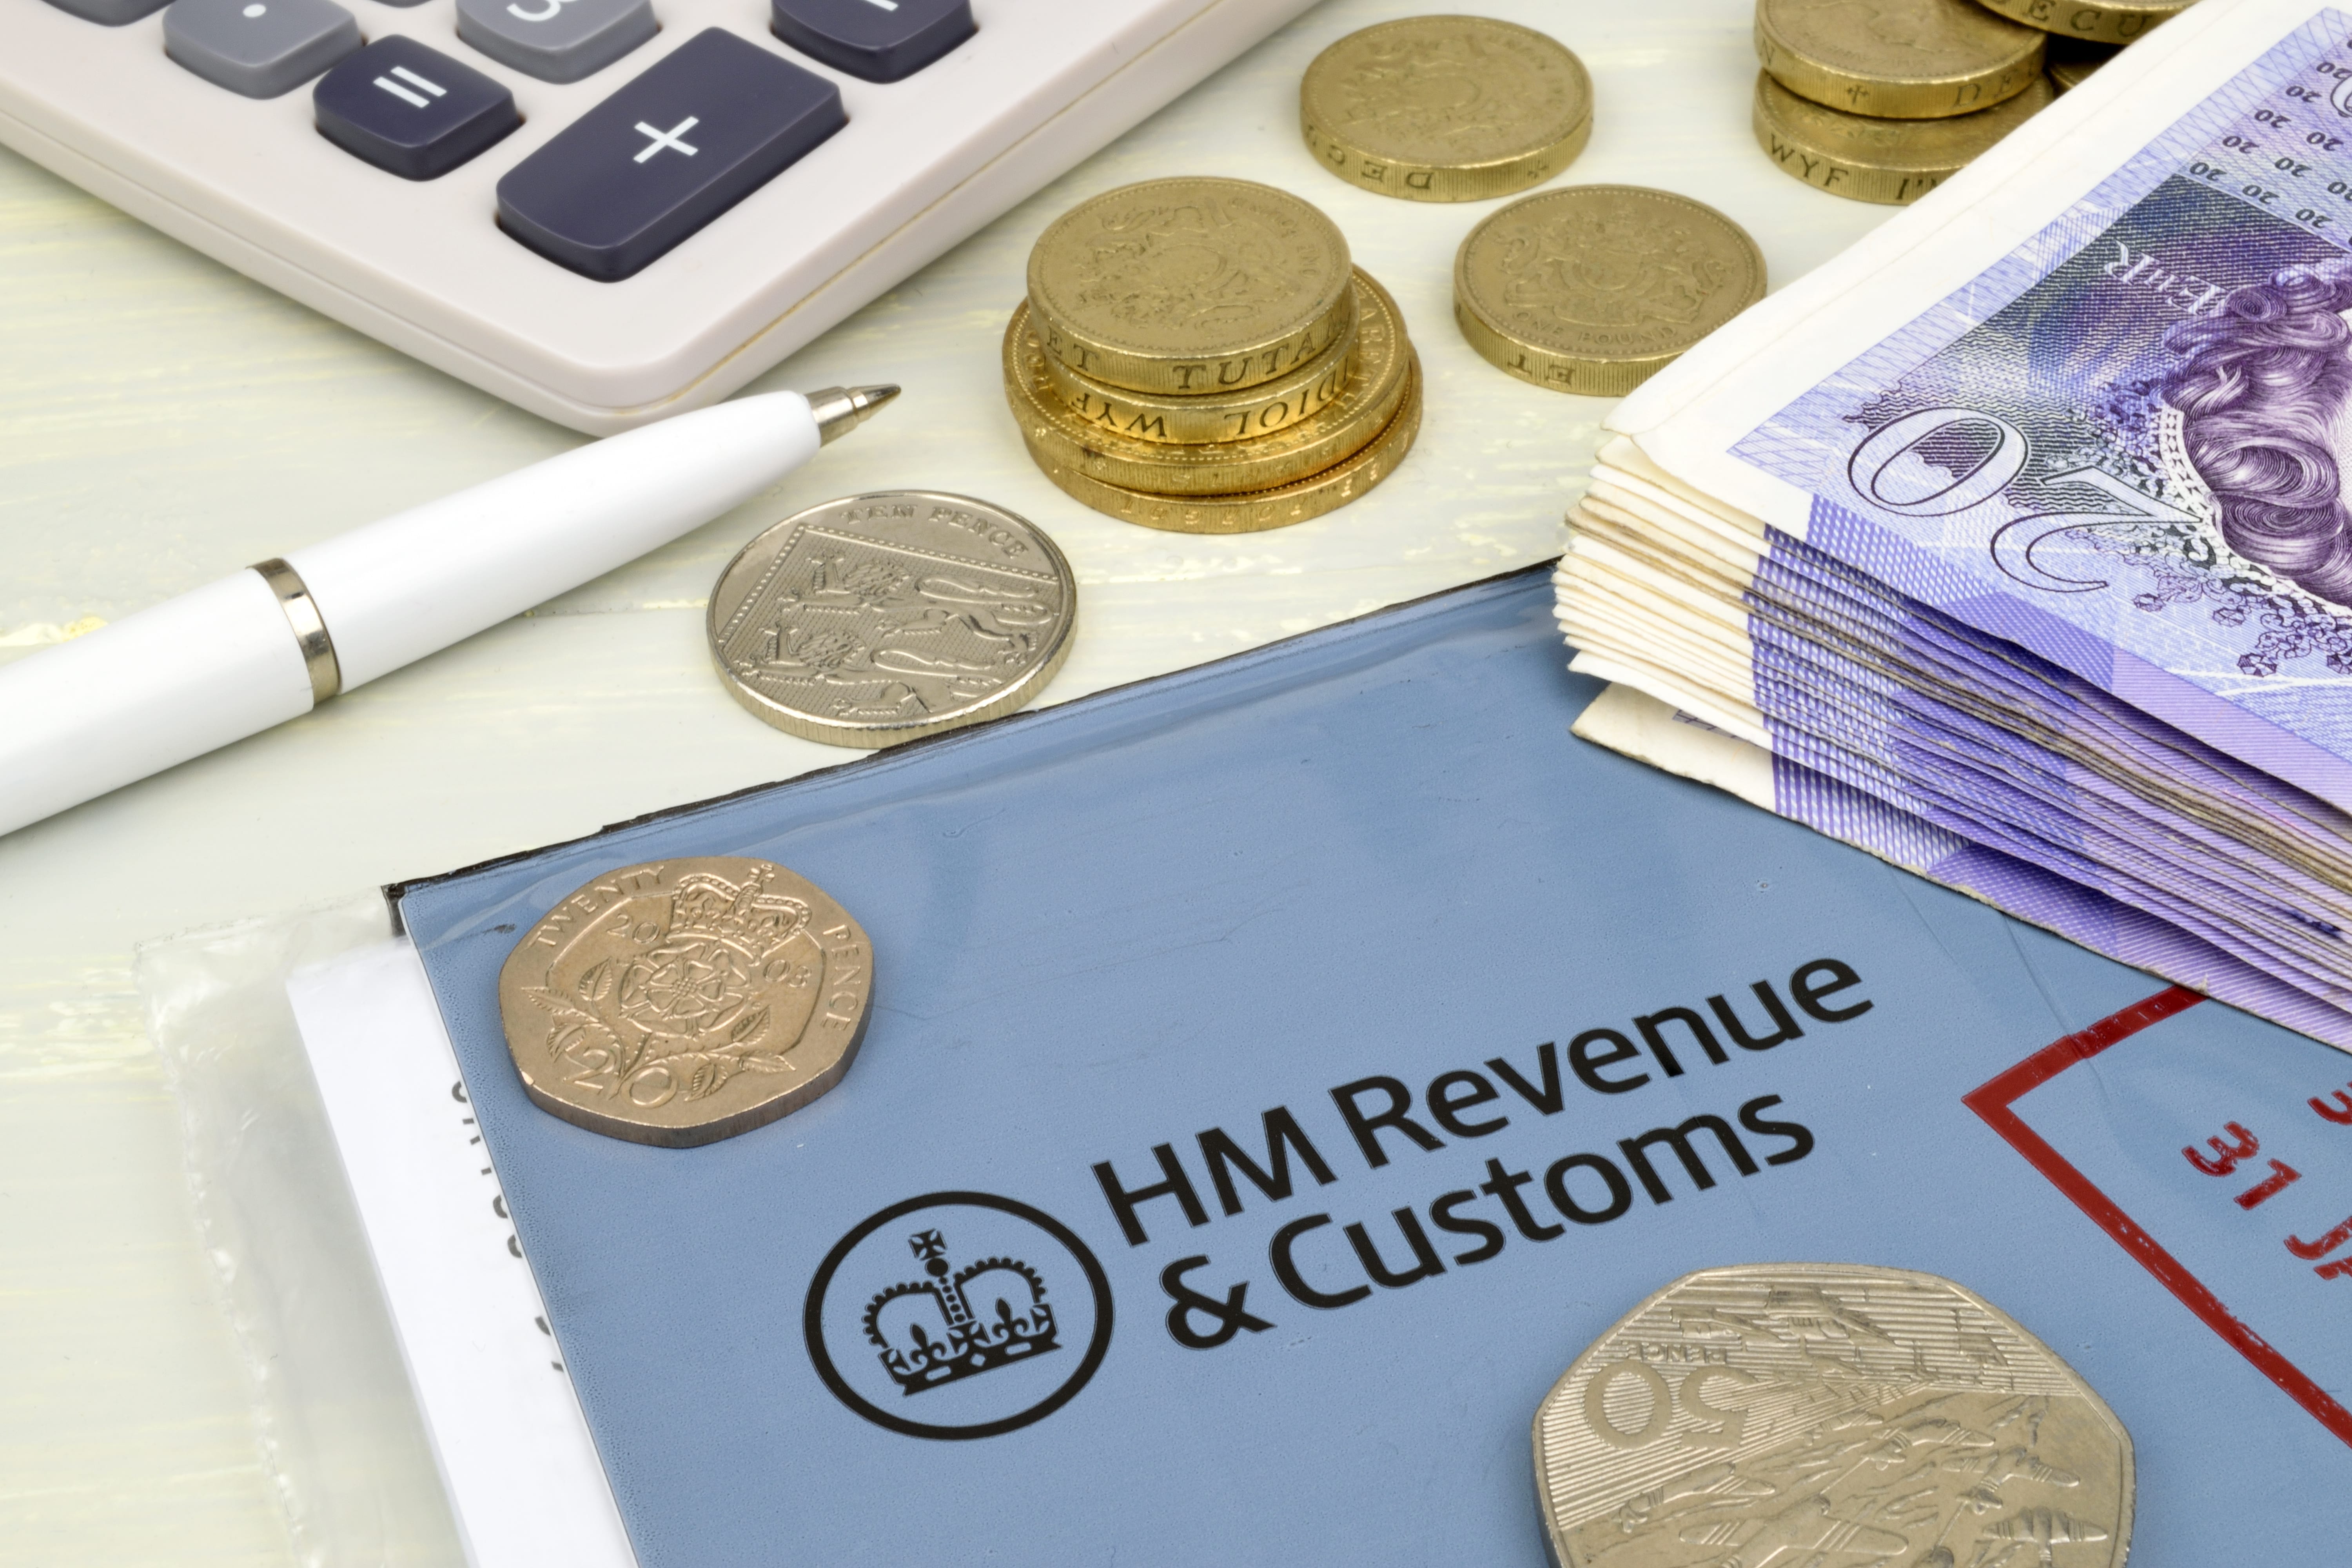 An HMRC document sits on the table in the foreground with a pile of £20 notes to one side and various denominations of coins strewn about. A calculator and pen sit on the table also.